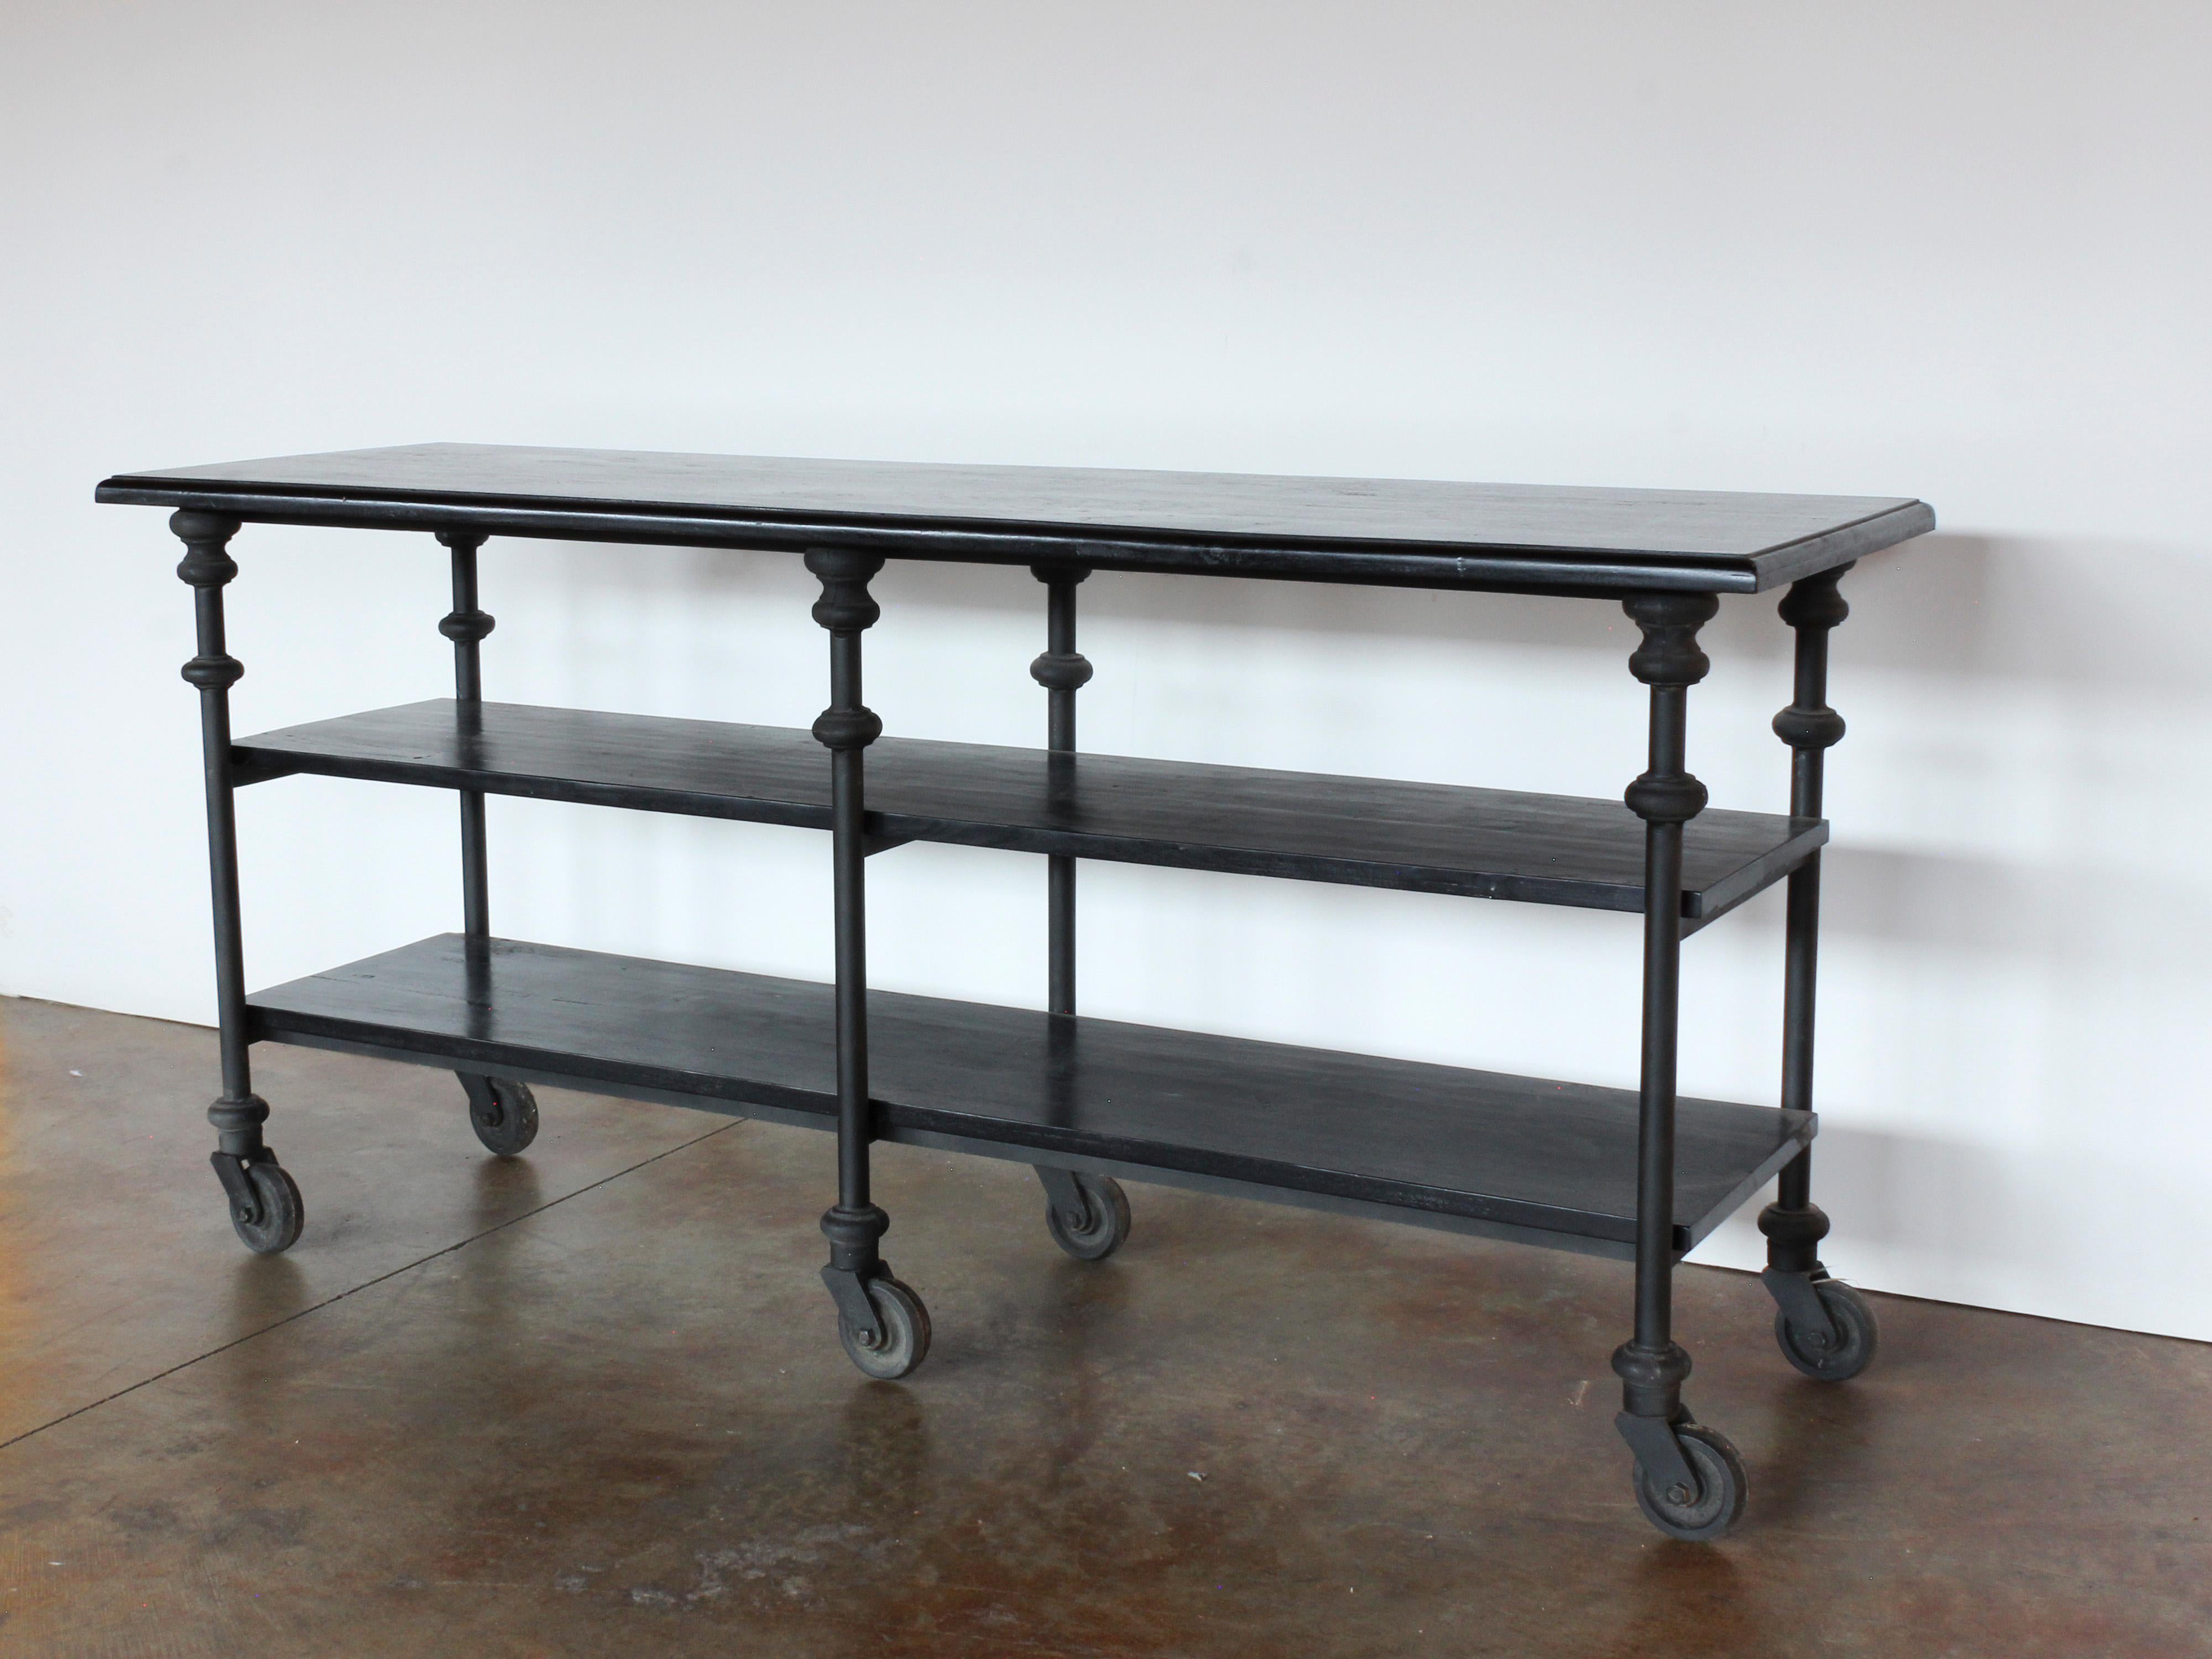 20th Century Blackened Iron and Wood Shelving Island on Casters